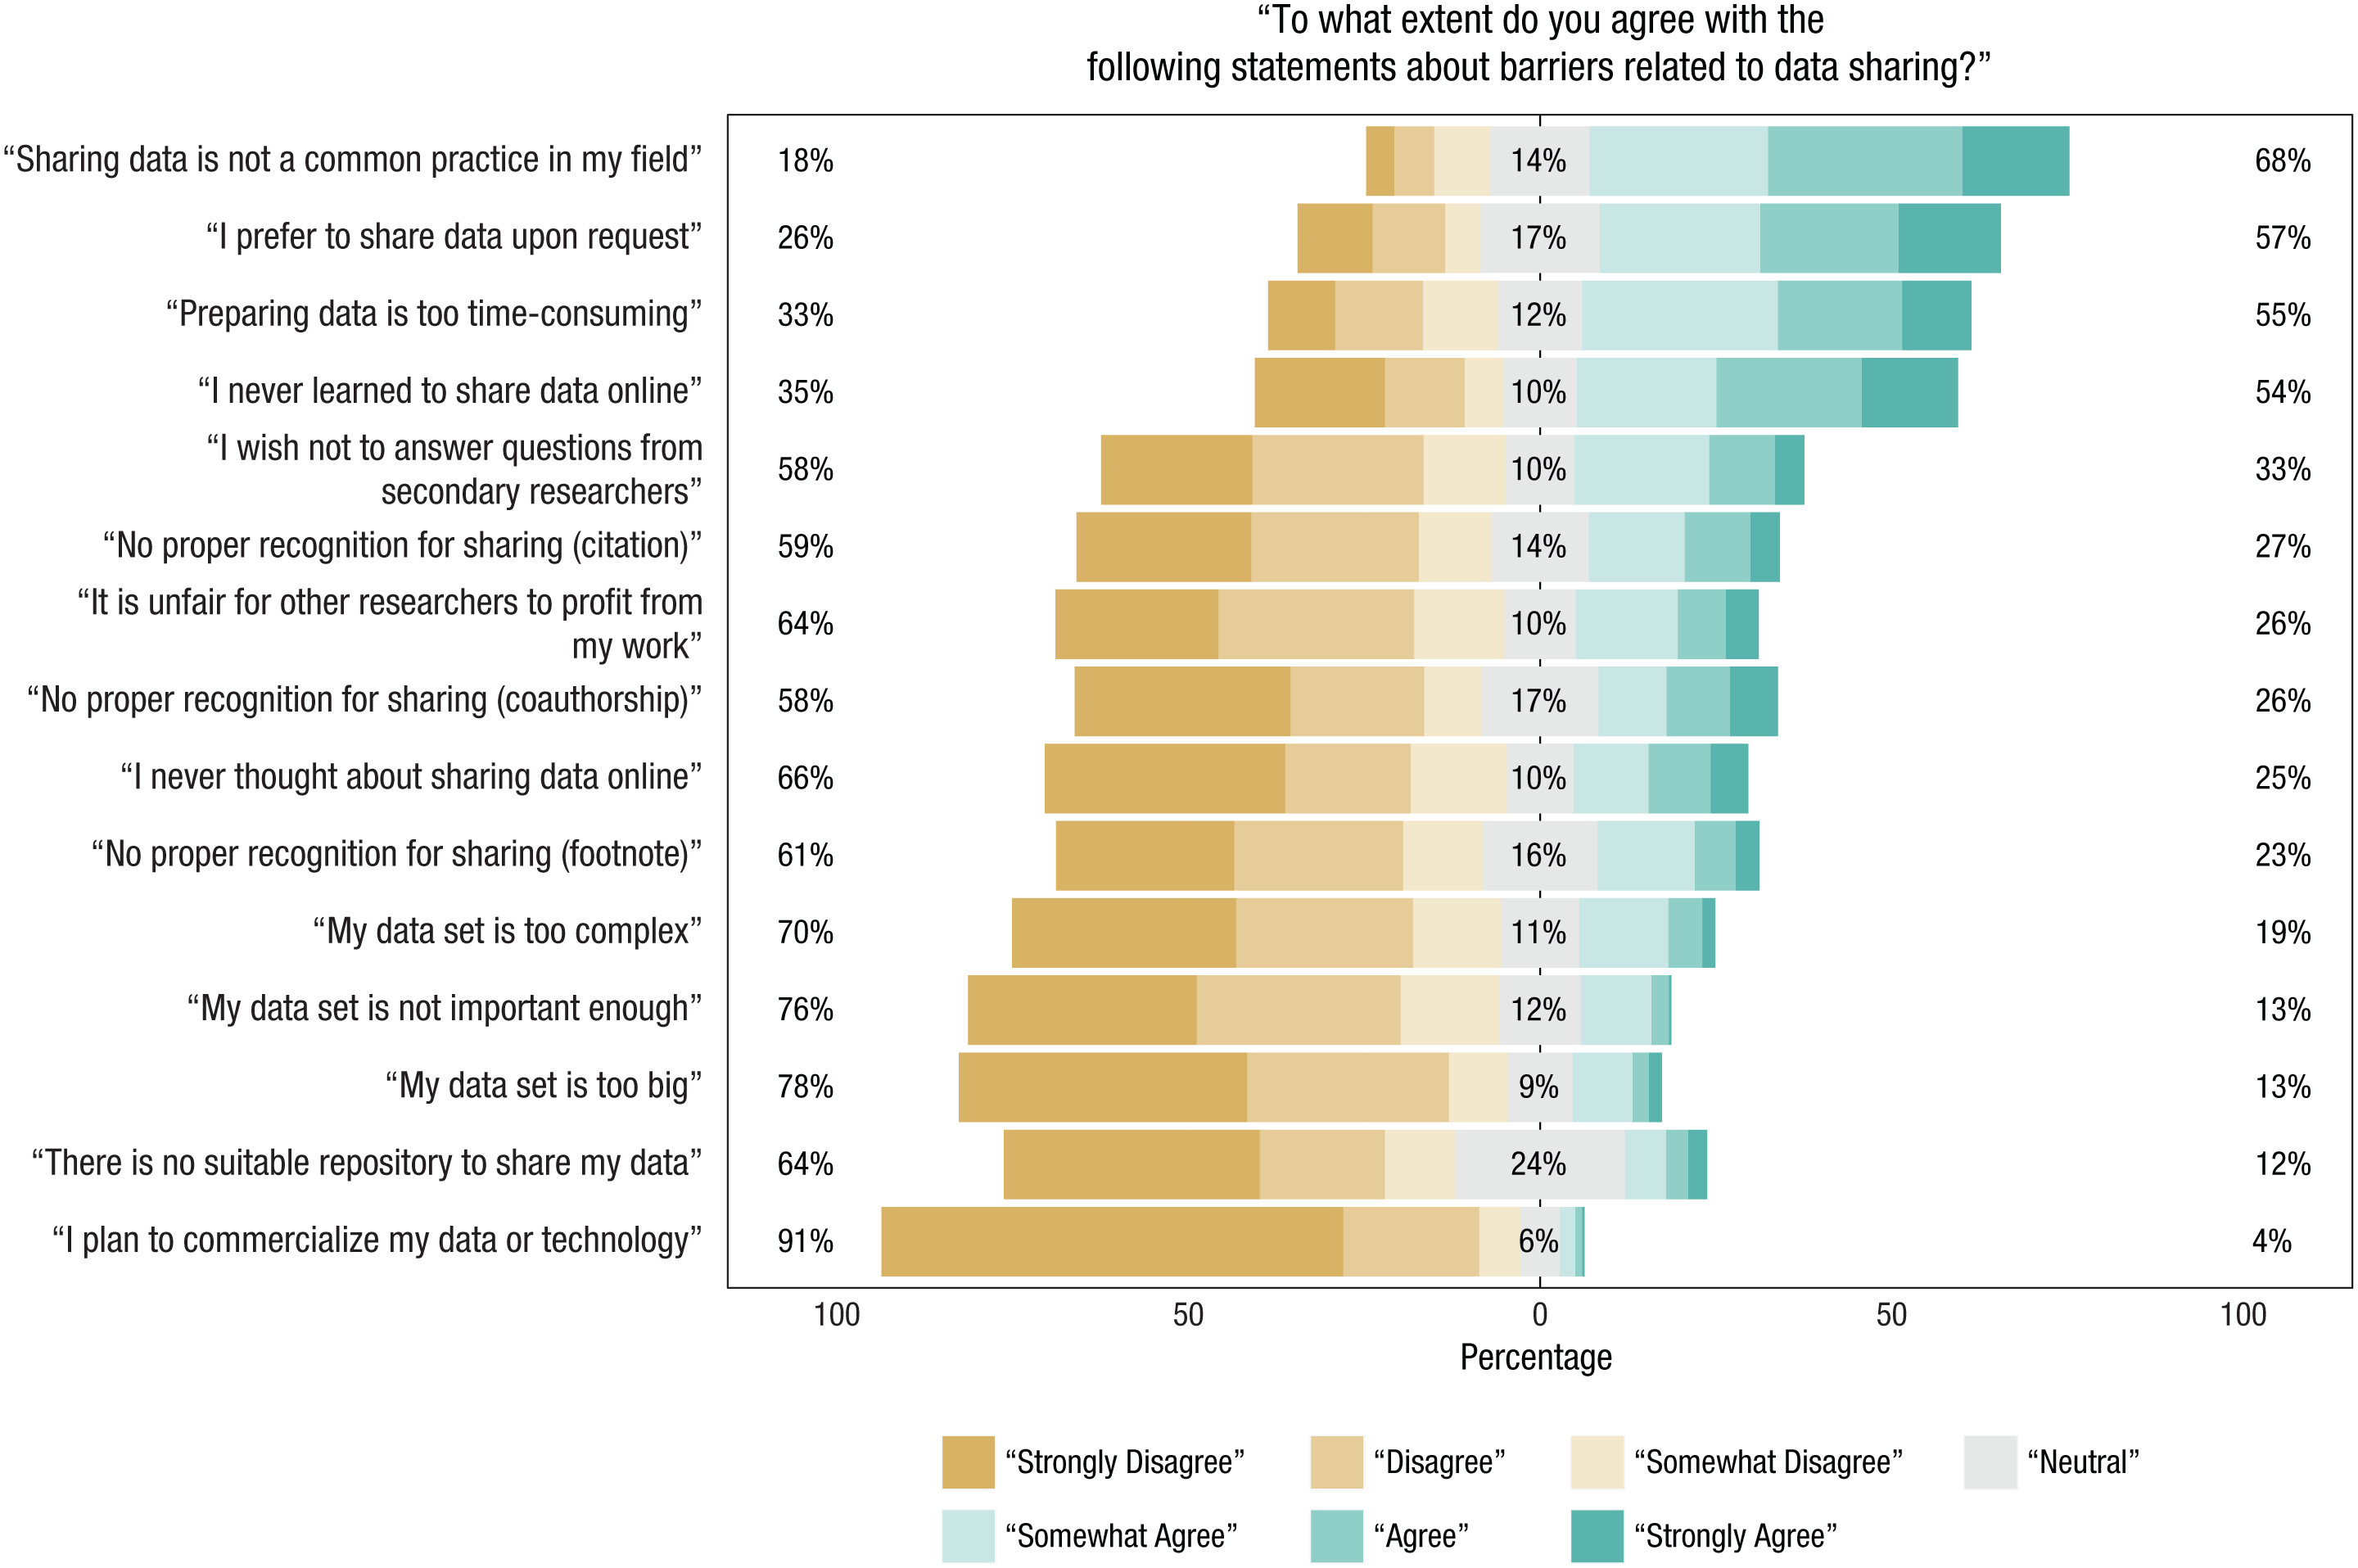 Figure 2 from [@Houtkoop2018-tl](https://doi.org/10.1177/2515245917751886). Responses to the survey questions asking respondents to indicate the extent to which the 15 non-fear-related barriers kept them from sharing their research data. For each statement, the number to the left of the data bar indicates the percentage of researchers who responded with “strongly disagree,” “disagree,” or “somewhat disagree”; the number in the center of the data bar indicates the percentage of researchers who responded with “neutral”; and the number to the right of the data bar indicates the percentage who responded with “somewhat agree,” “agree,” or “strongly agree.” The statements are ordered according to the percentage of agreement (greatest agreement at the top). This figure was created using the likert package in R (Bryer & Speerschneider, 2015).